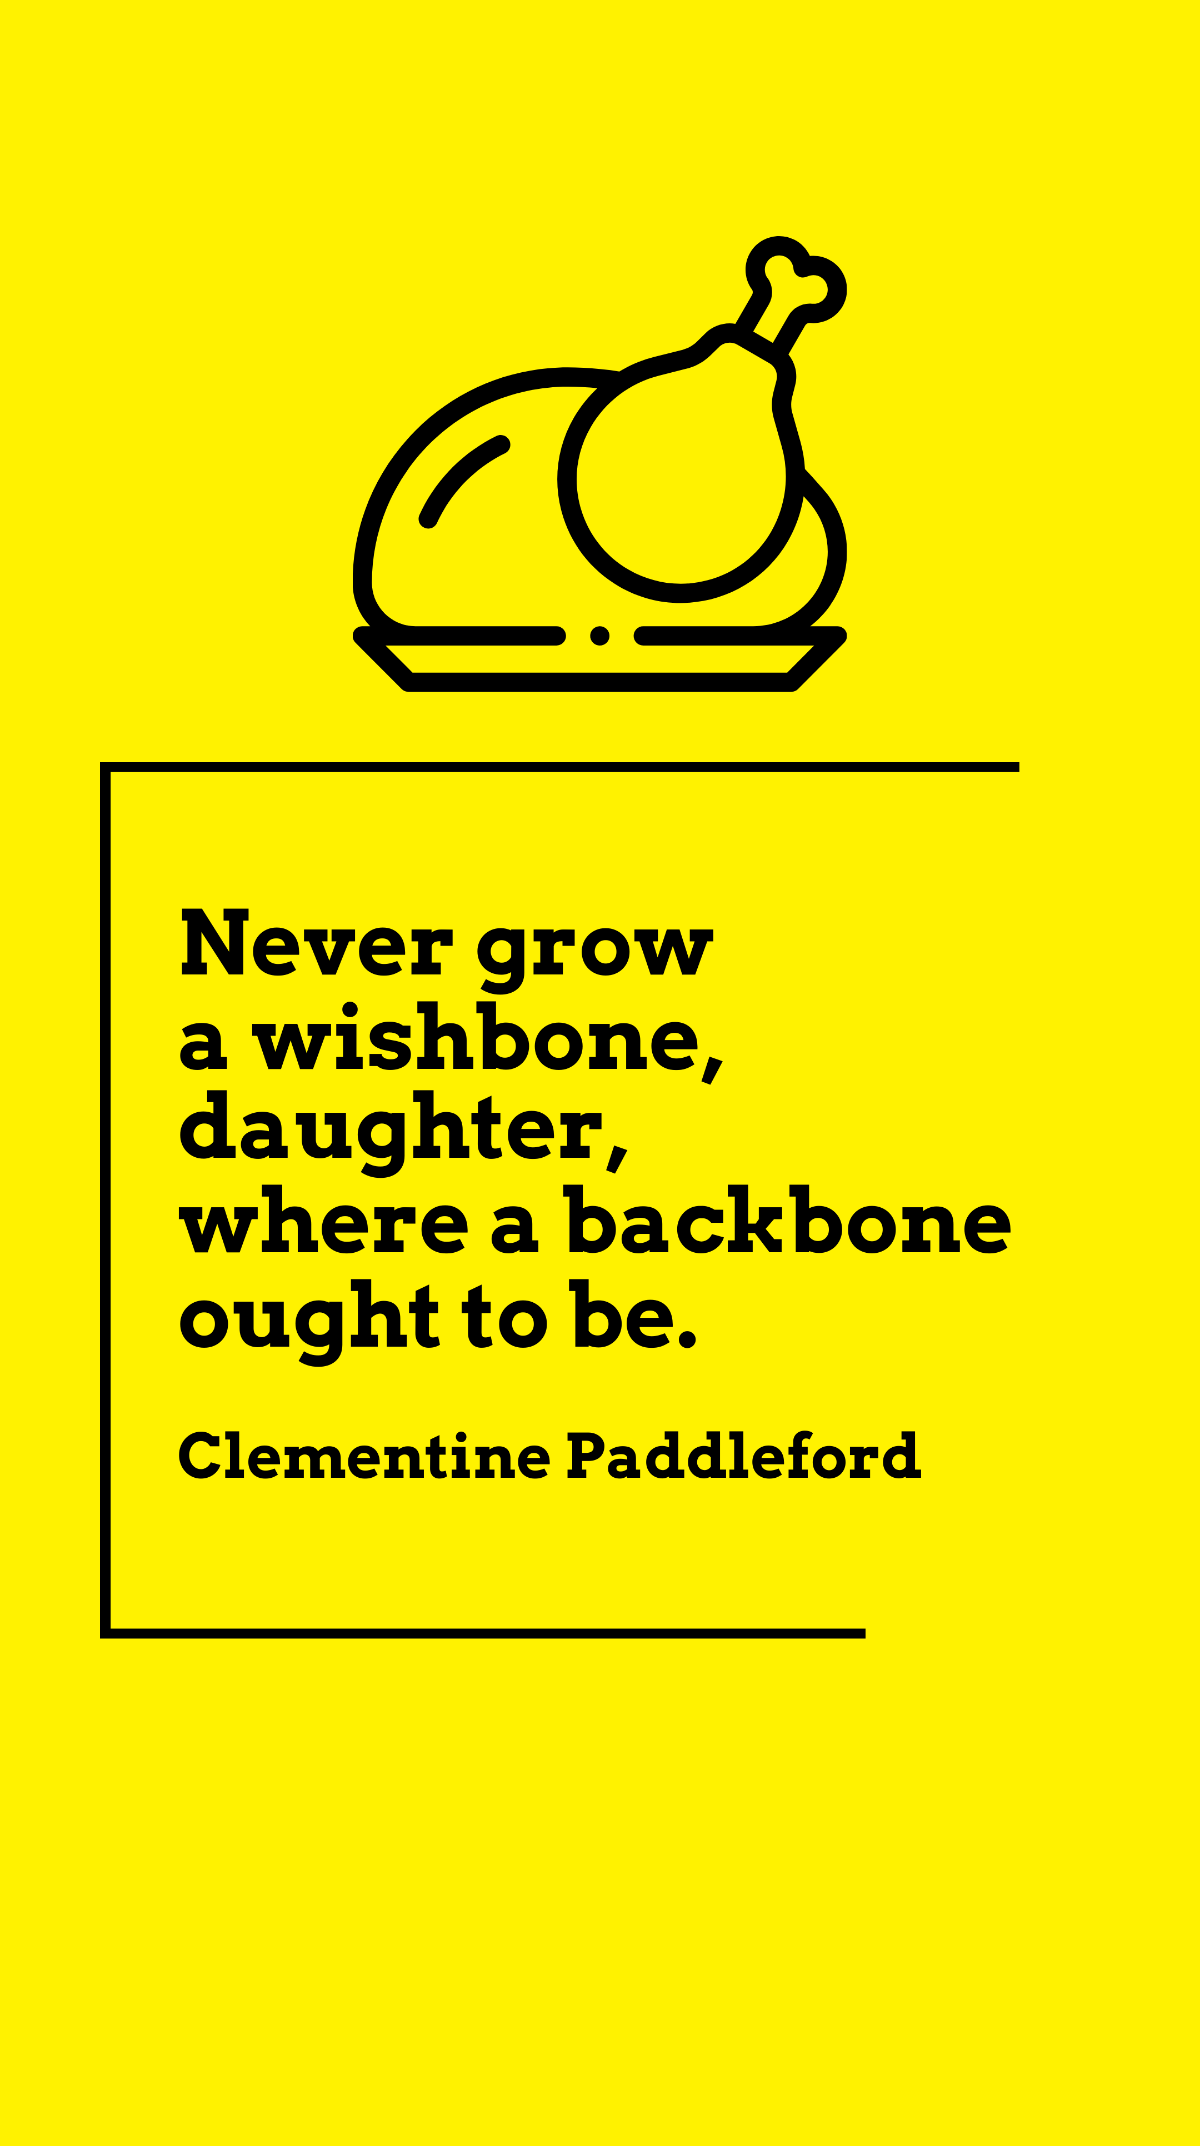 Clementine Paddleford - Never grow a wishbone, daughter, where a backbone ought to be. Template